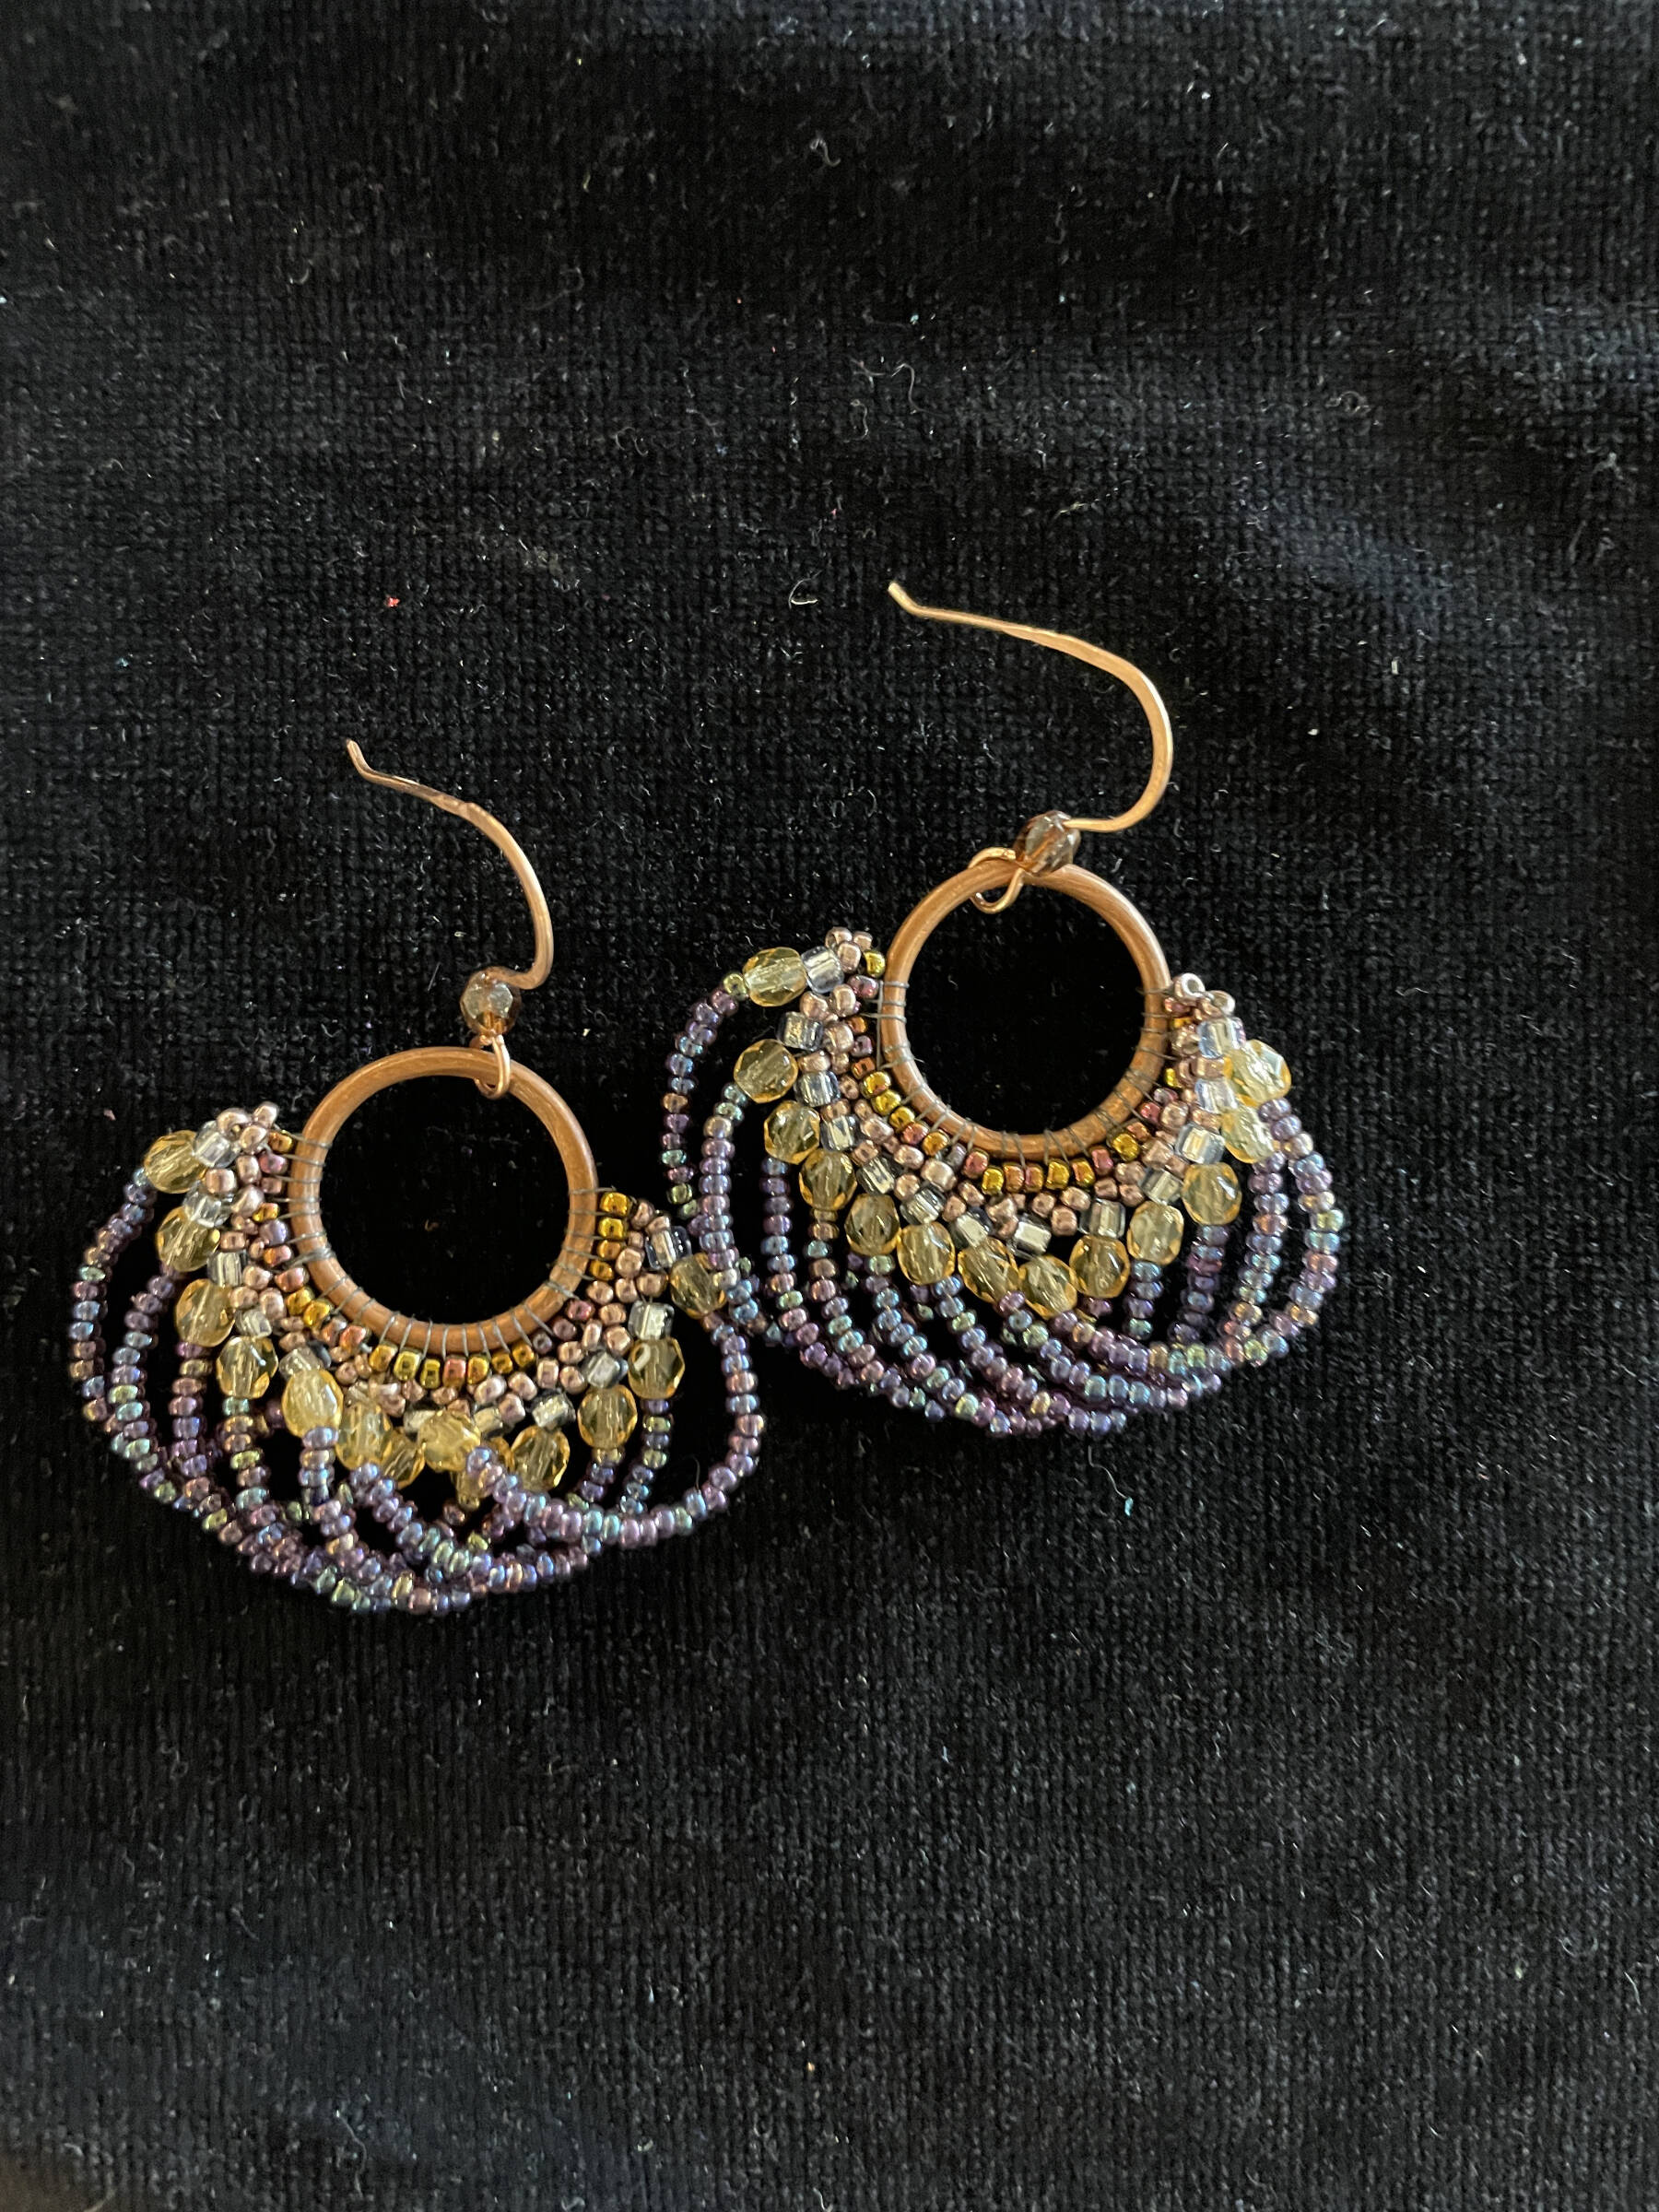 Beaded and metalwork earrings, created by Homer artist Cindy Nelson in the summer of 2023, are available at Ptarmigan Arts. Photo provided by Cindy Nelson